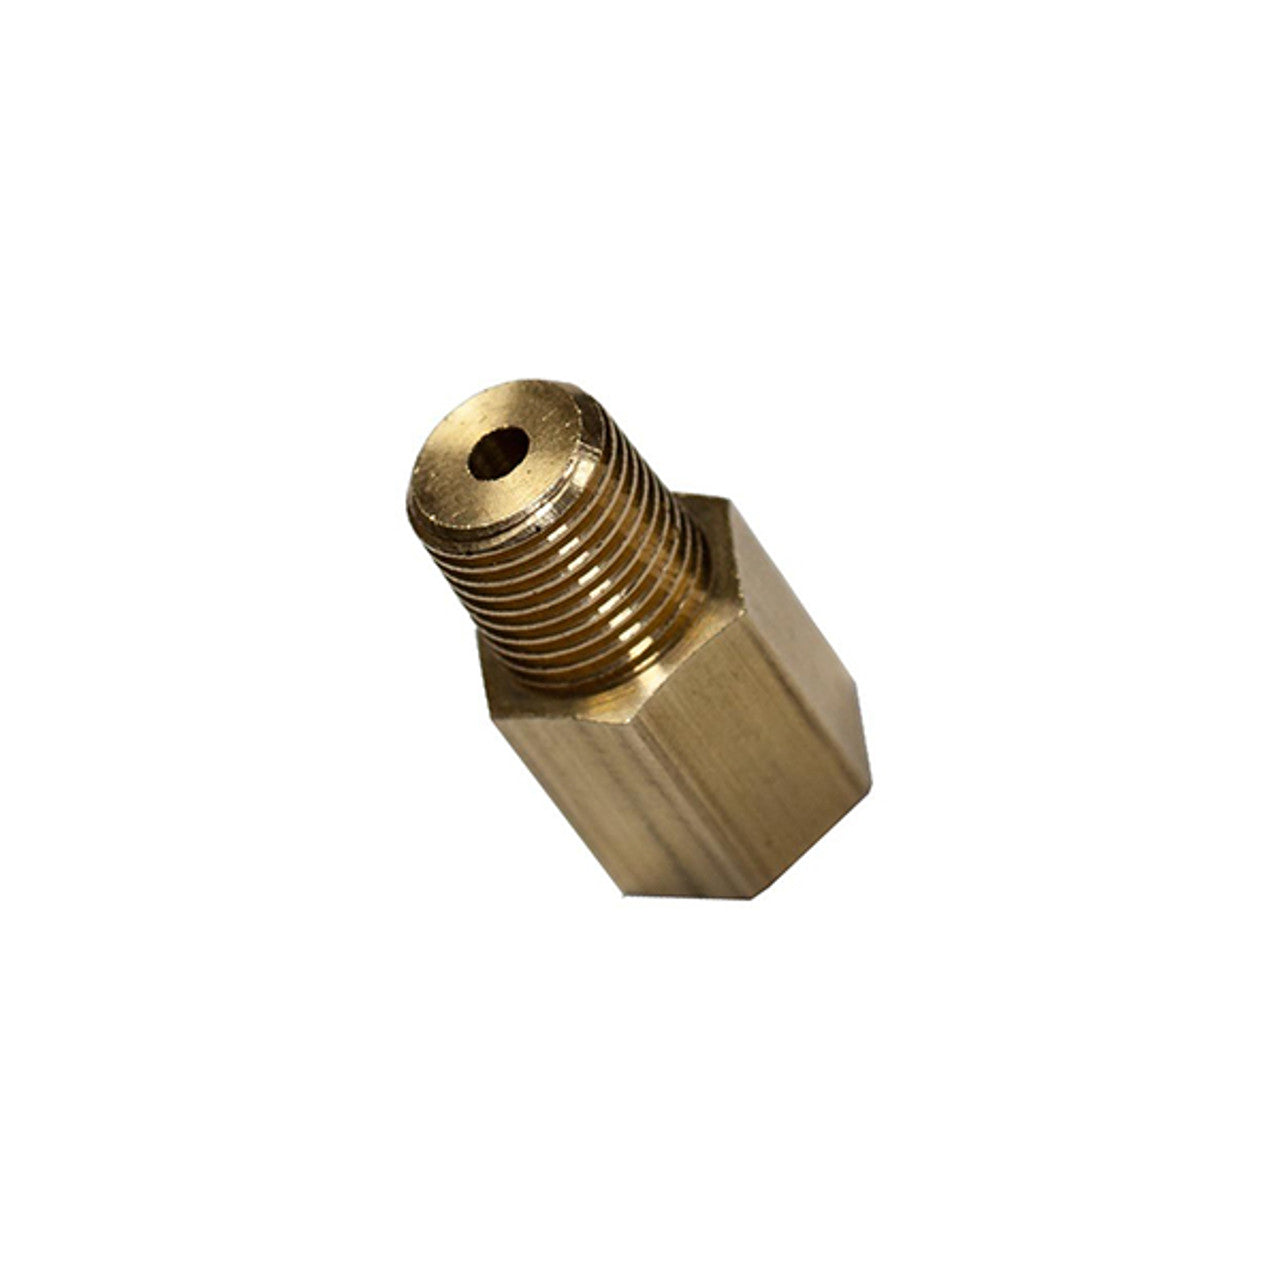 1/8 BSPT Male to 1/8-27 NPT Female Thread Adapter